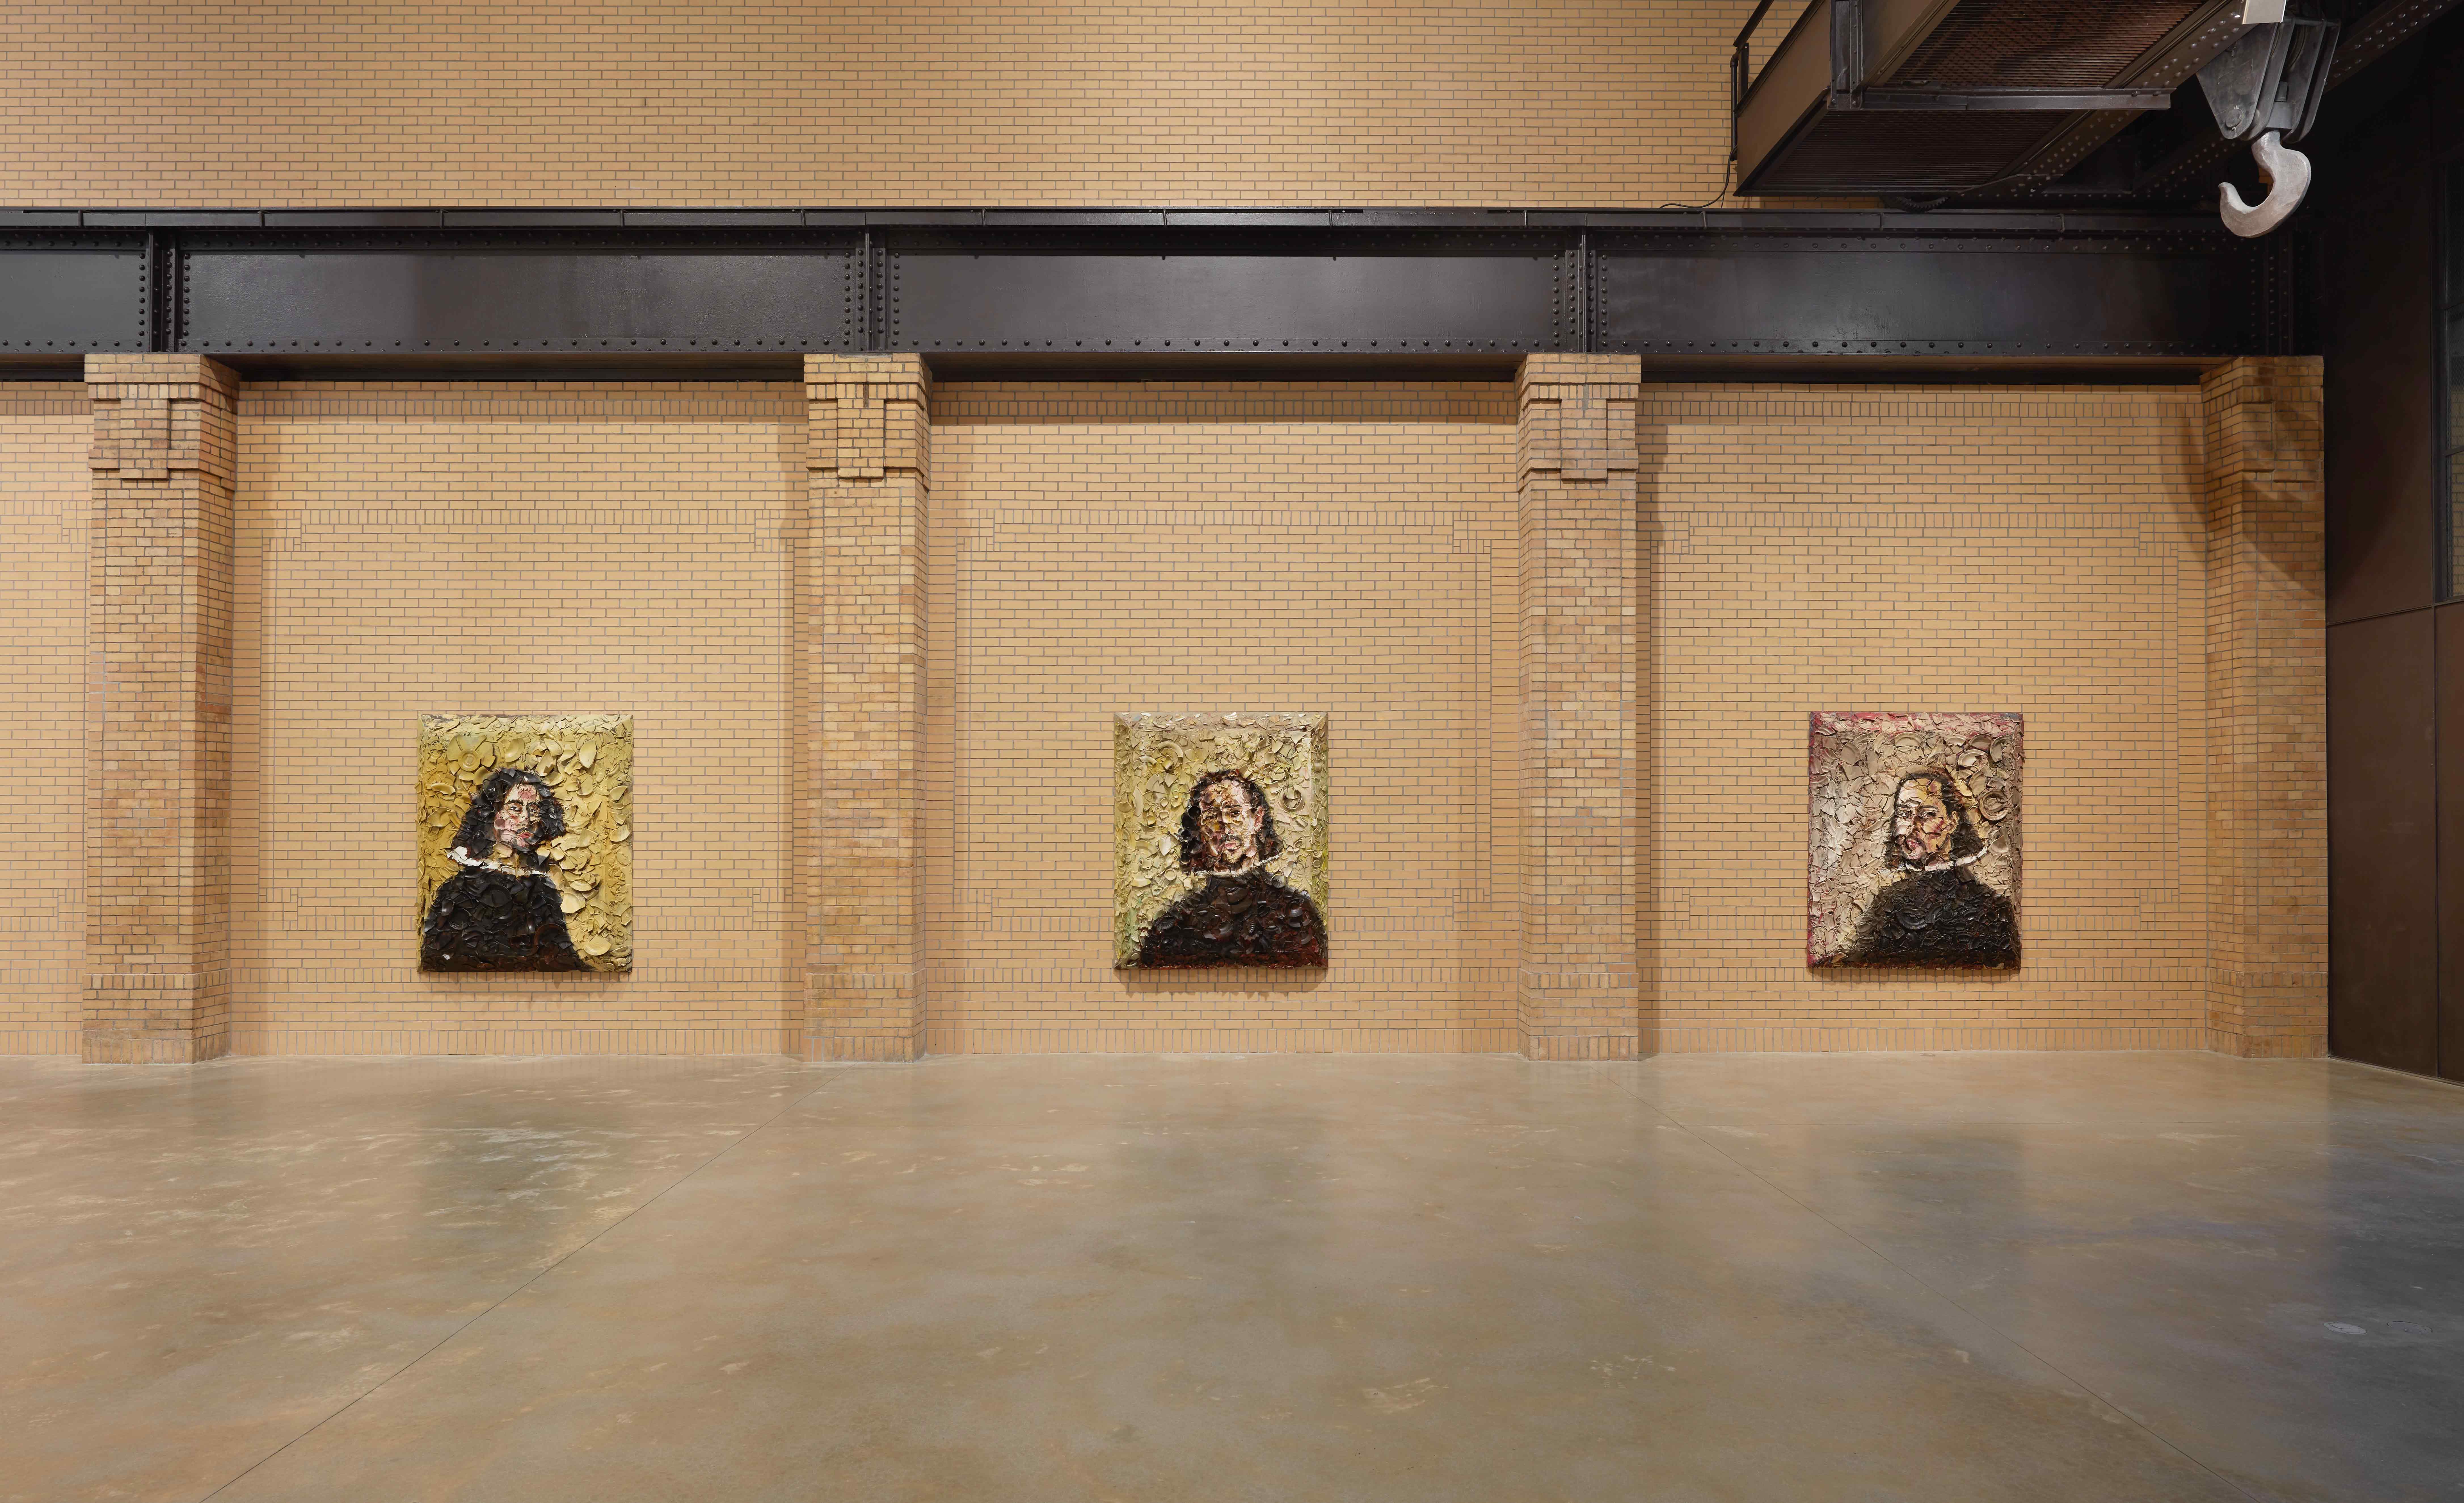 Installation view of “Self-Portraits of Others. Photography by Tom Powel Imaging.